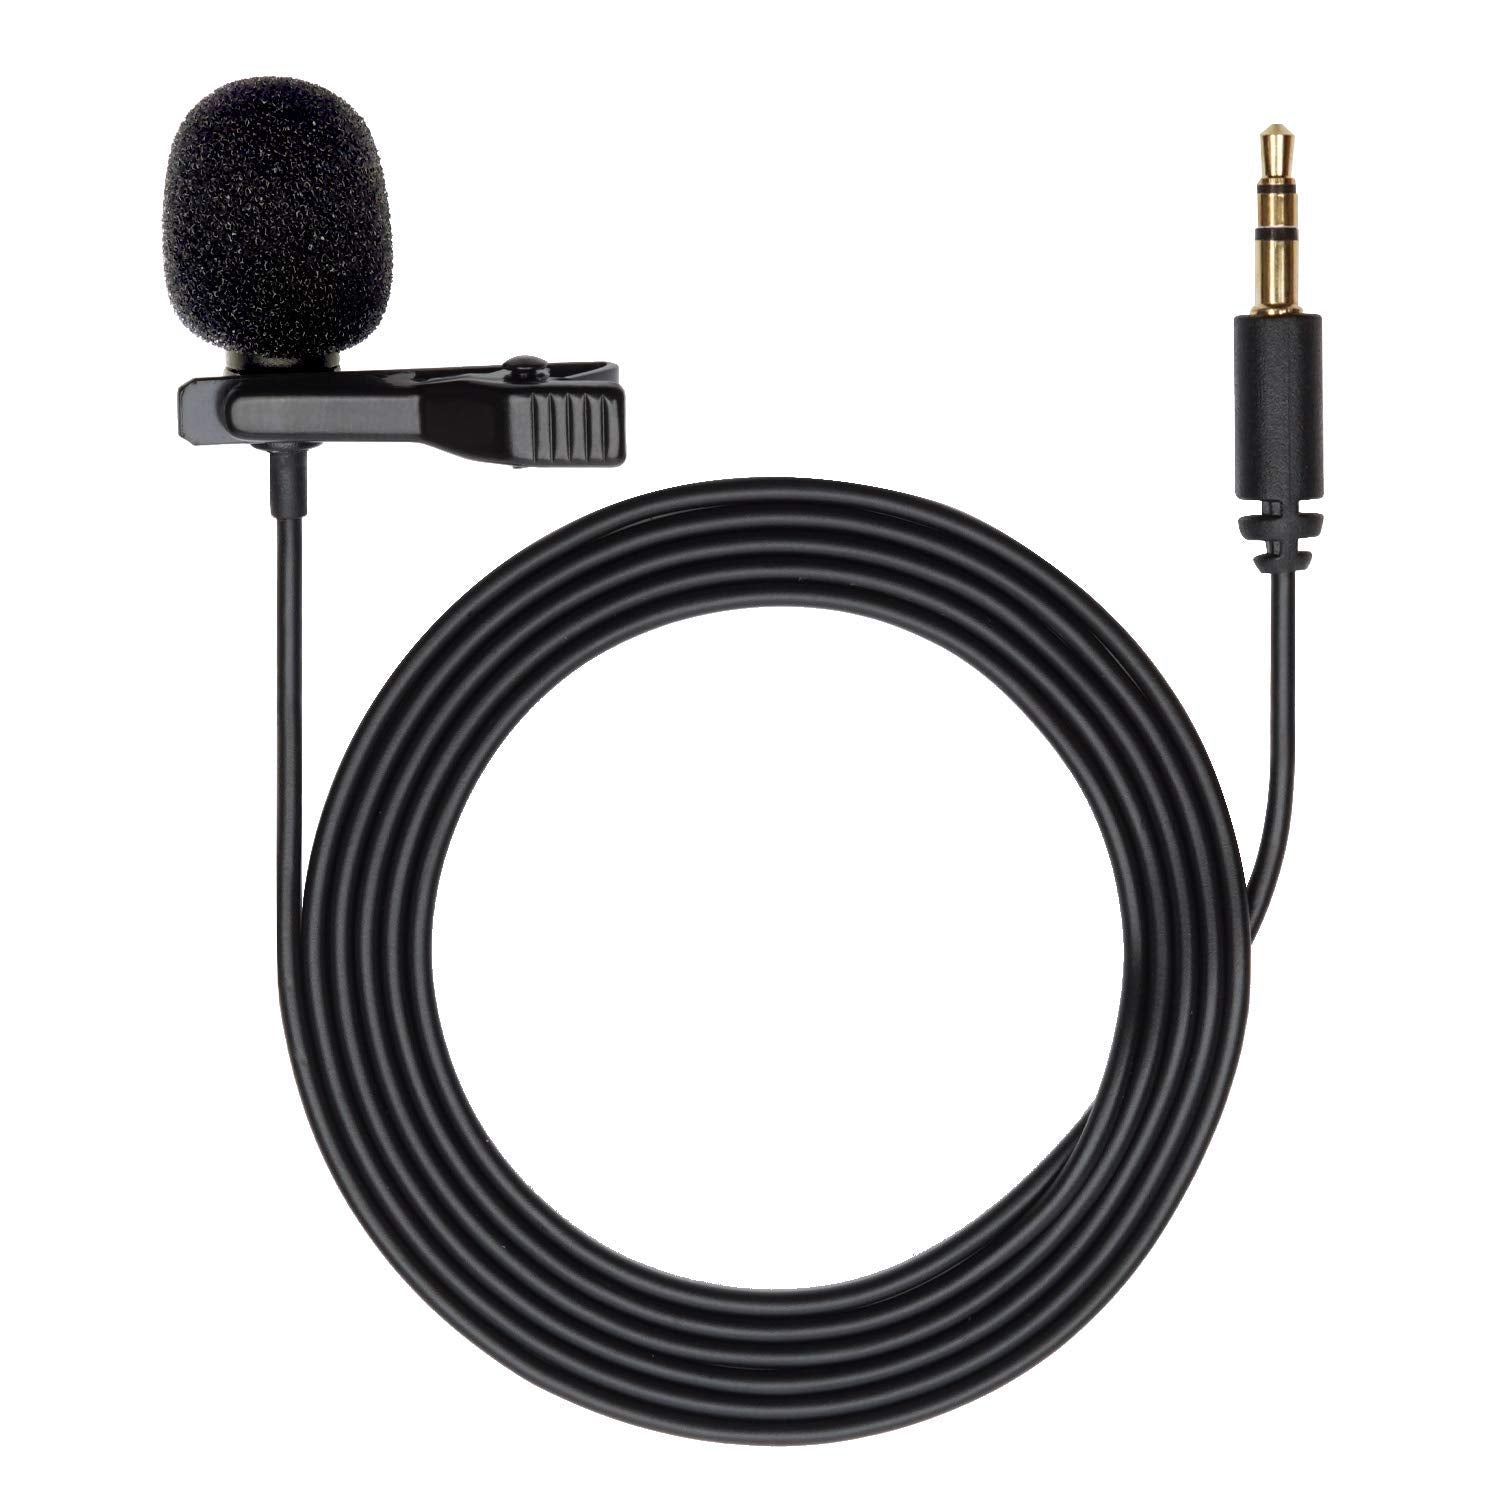 Movo DOM1 3.5mm TRS Lavalier Omnidirectional Condenser Microphone for Camera Microphone Compatible with DSLR Cameras, Recorders and More  - Very Good